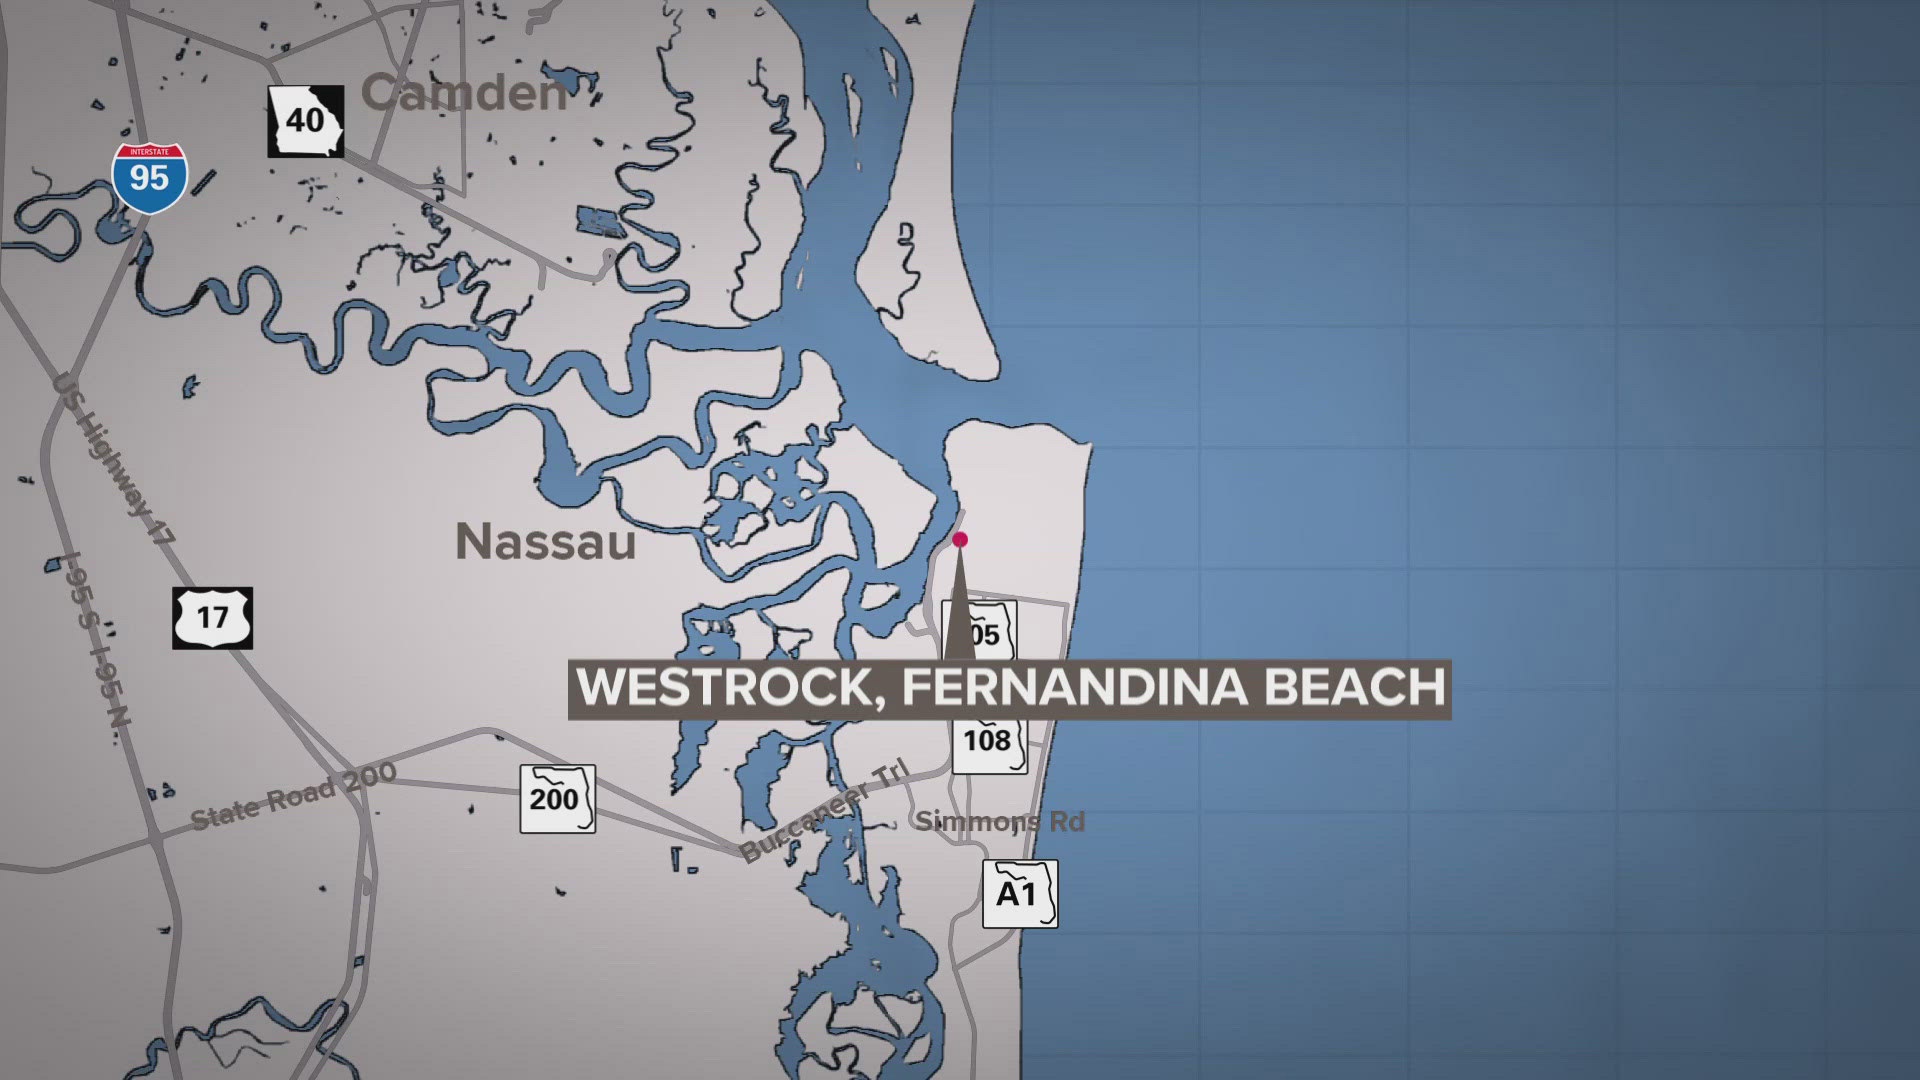 The Nassau County Sheriff's Office said the bite occurred at WestRock, 600 N. 8th St. in Fernandina Beach.